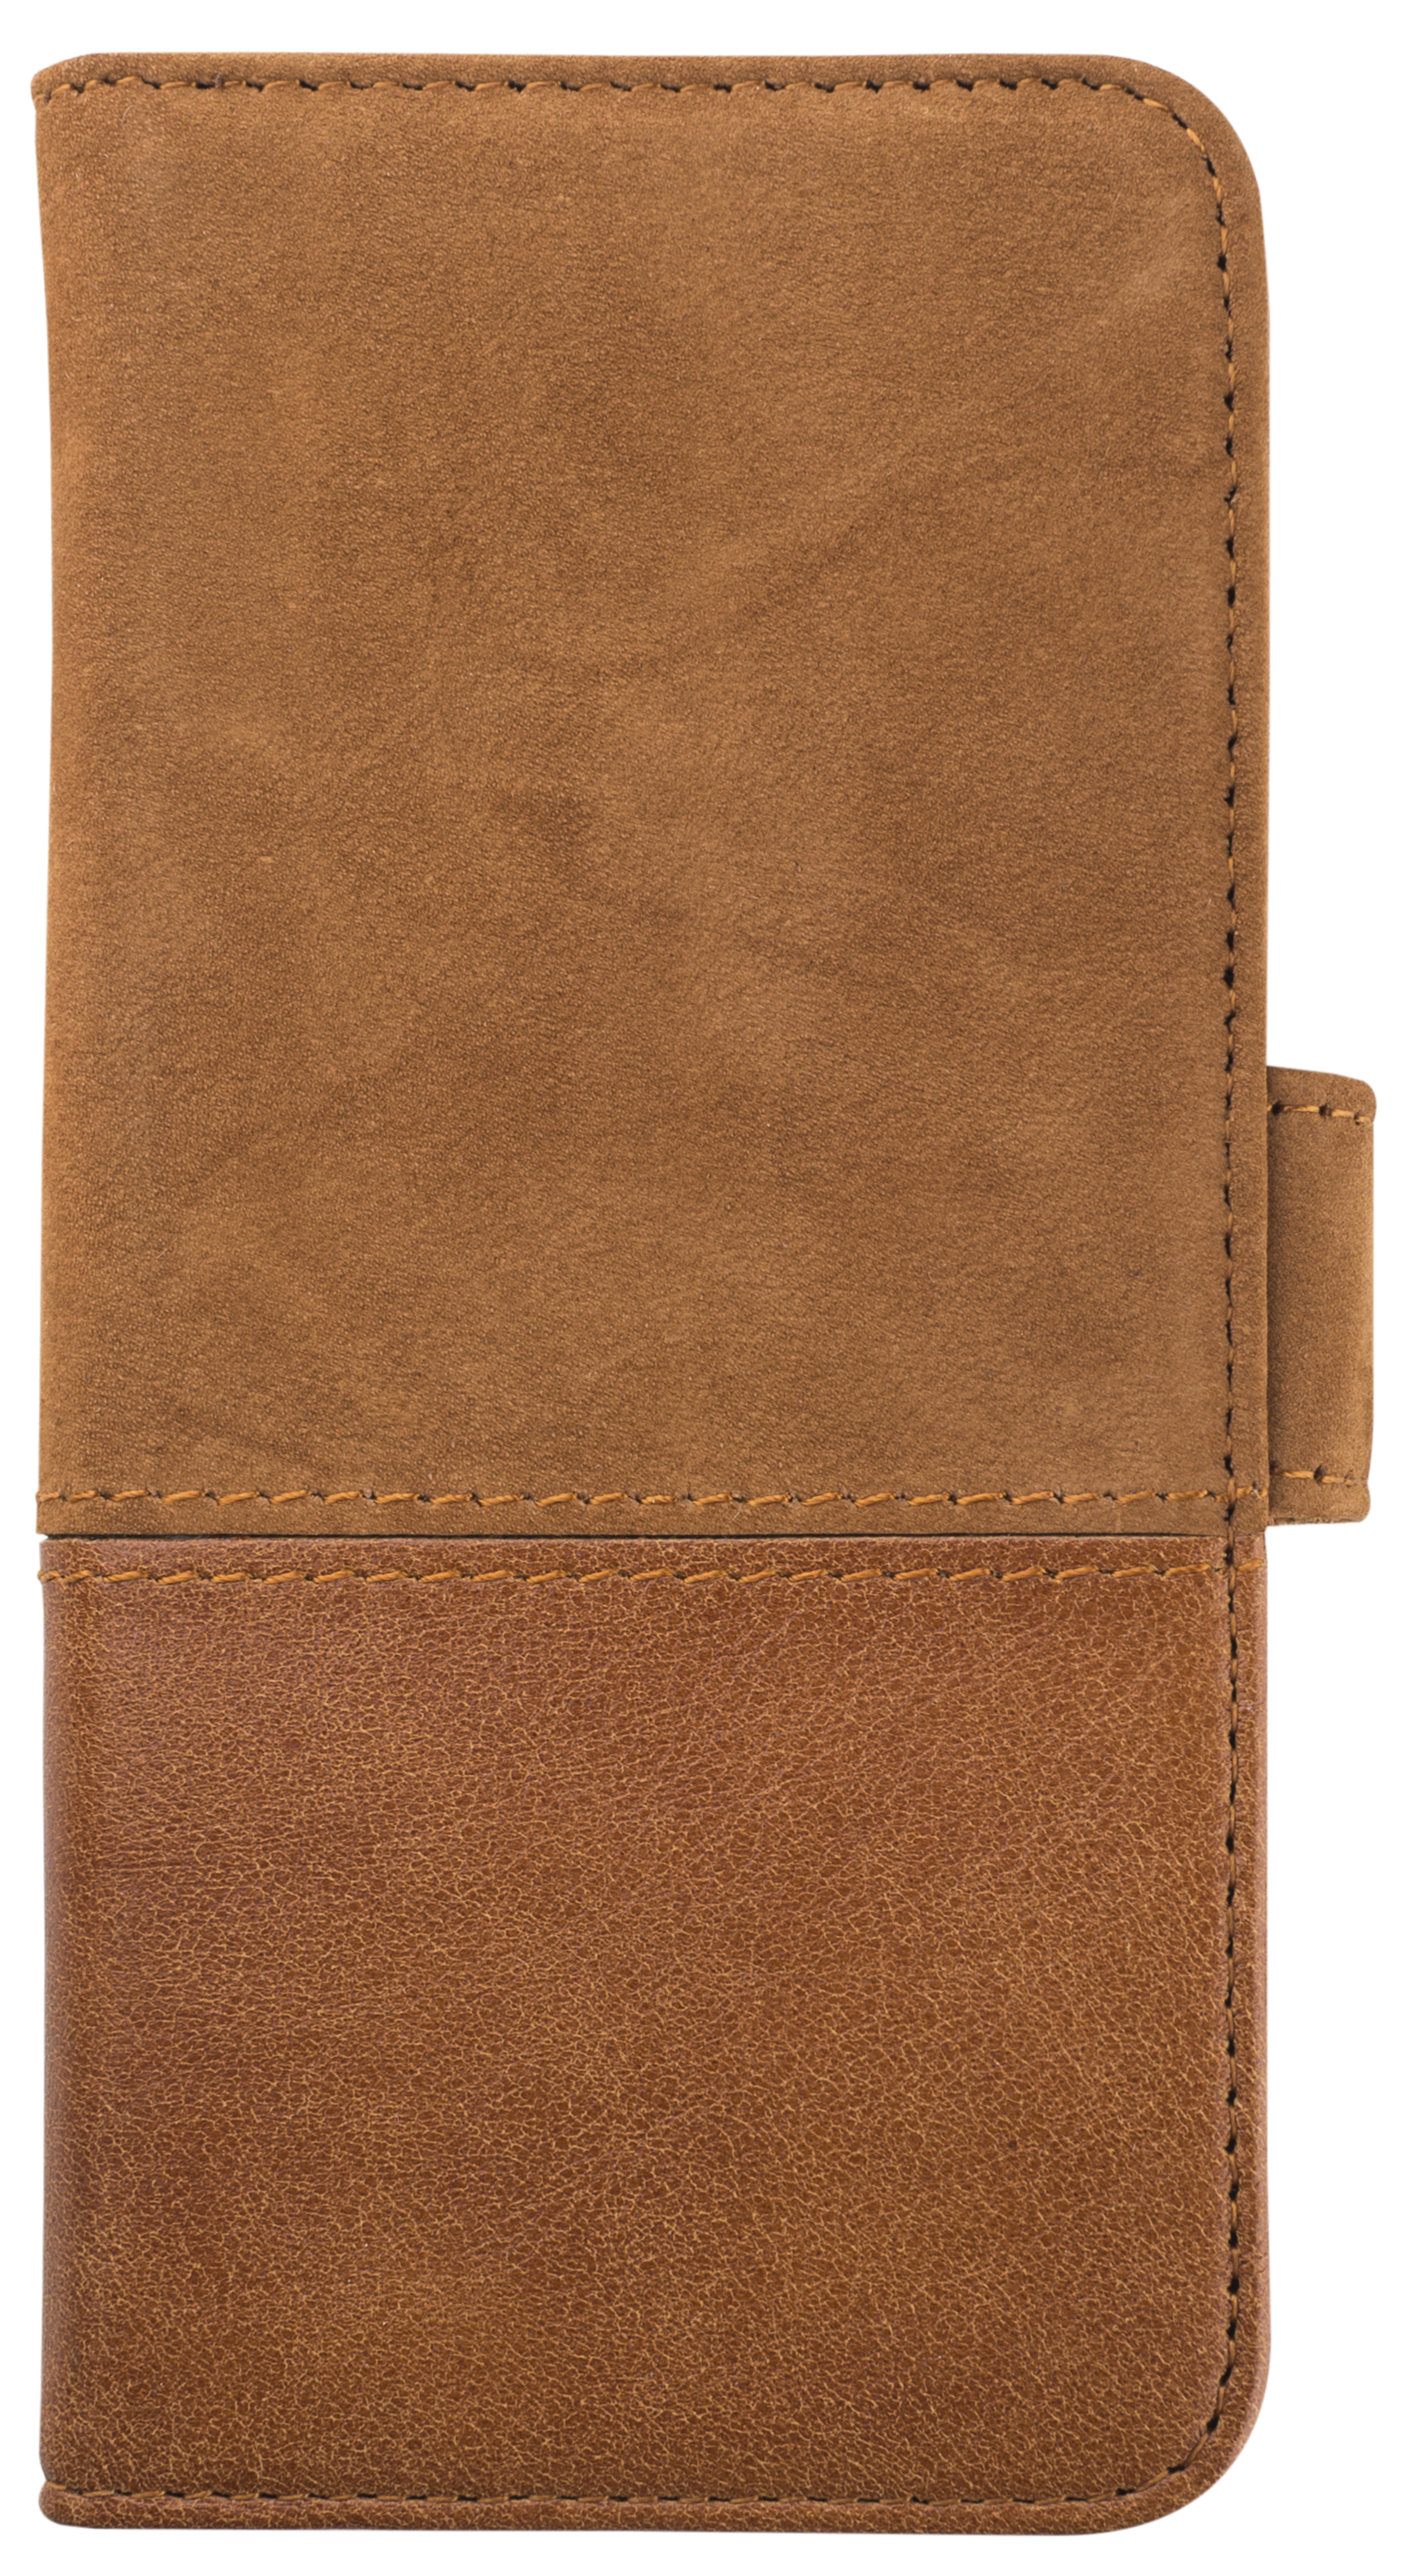 HOLDIT Wallet magnet pouzdro flip Samsung Galaxy S8 brown leather/suede